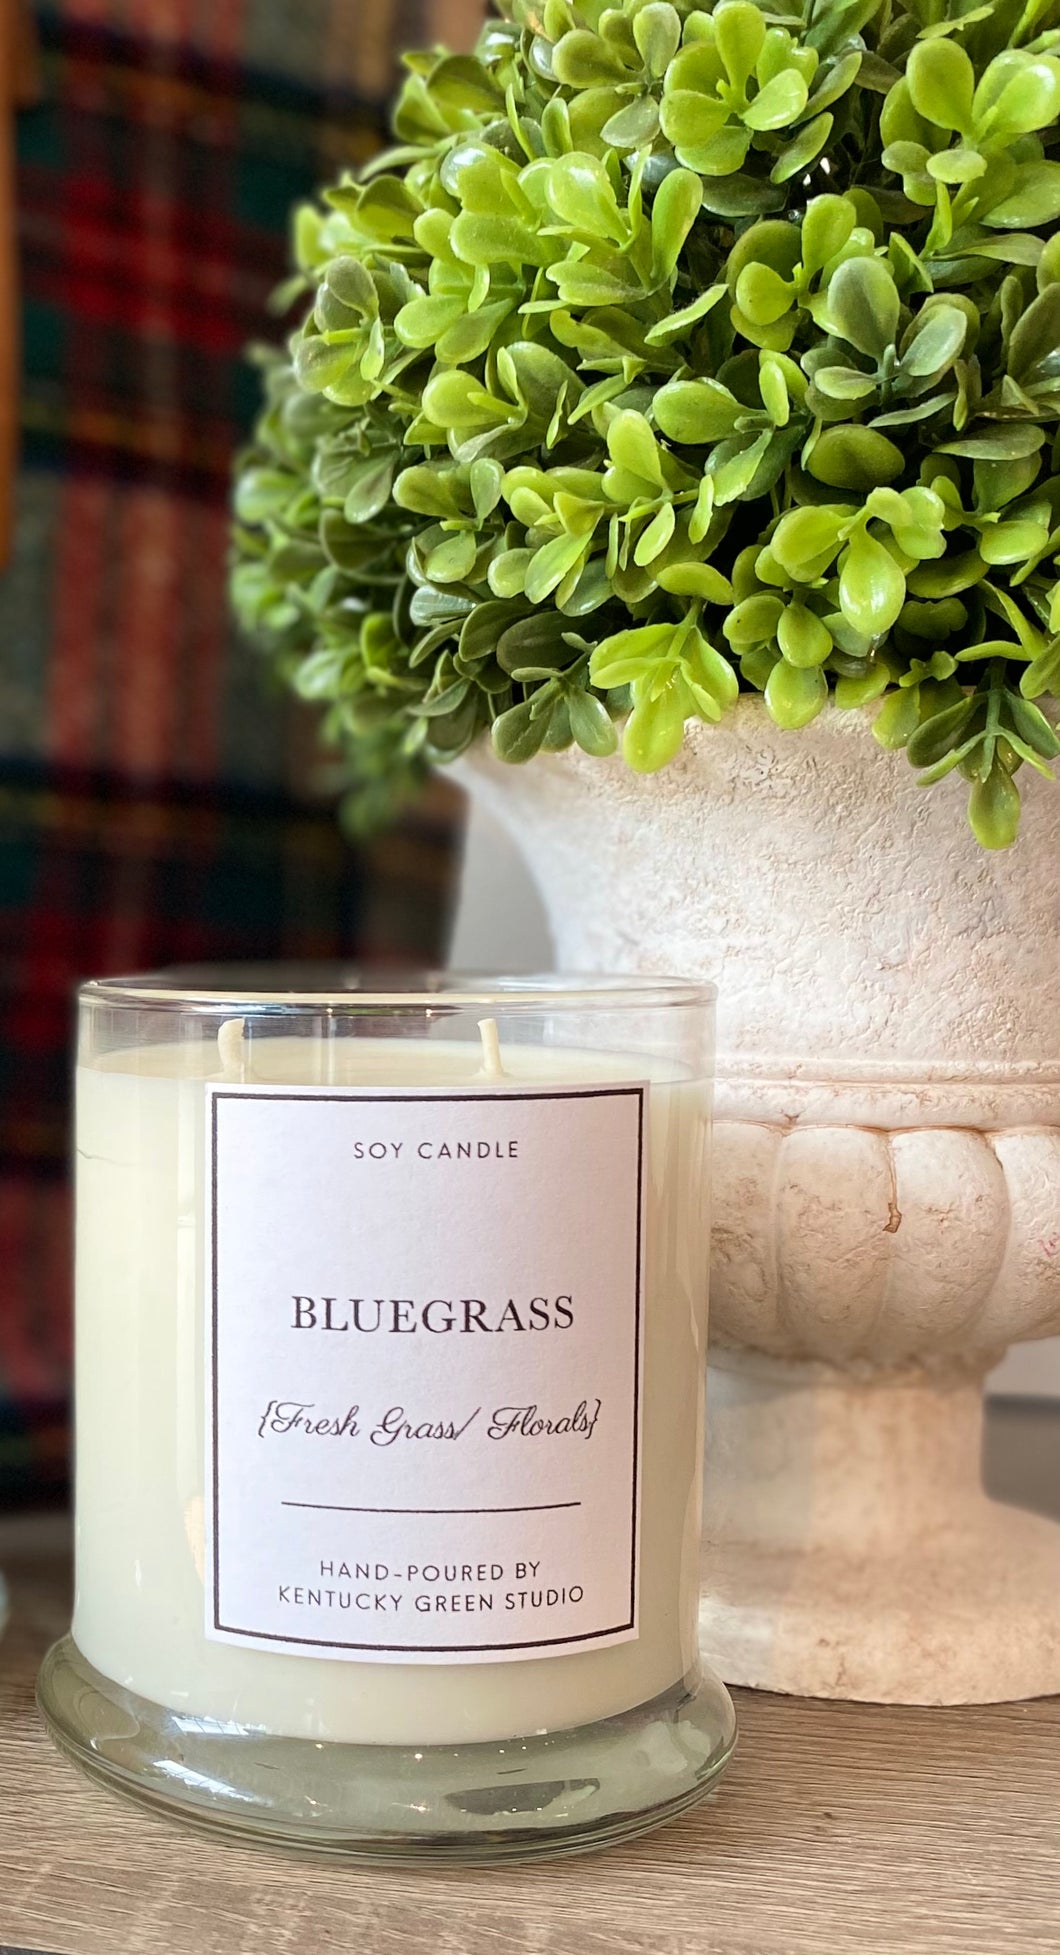 KY Green Studio Bluegrass Soy Candle